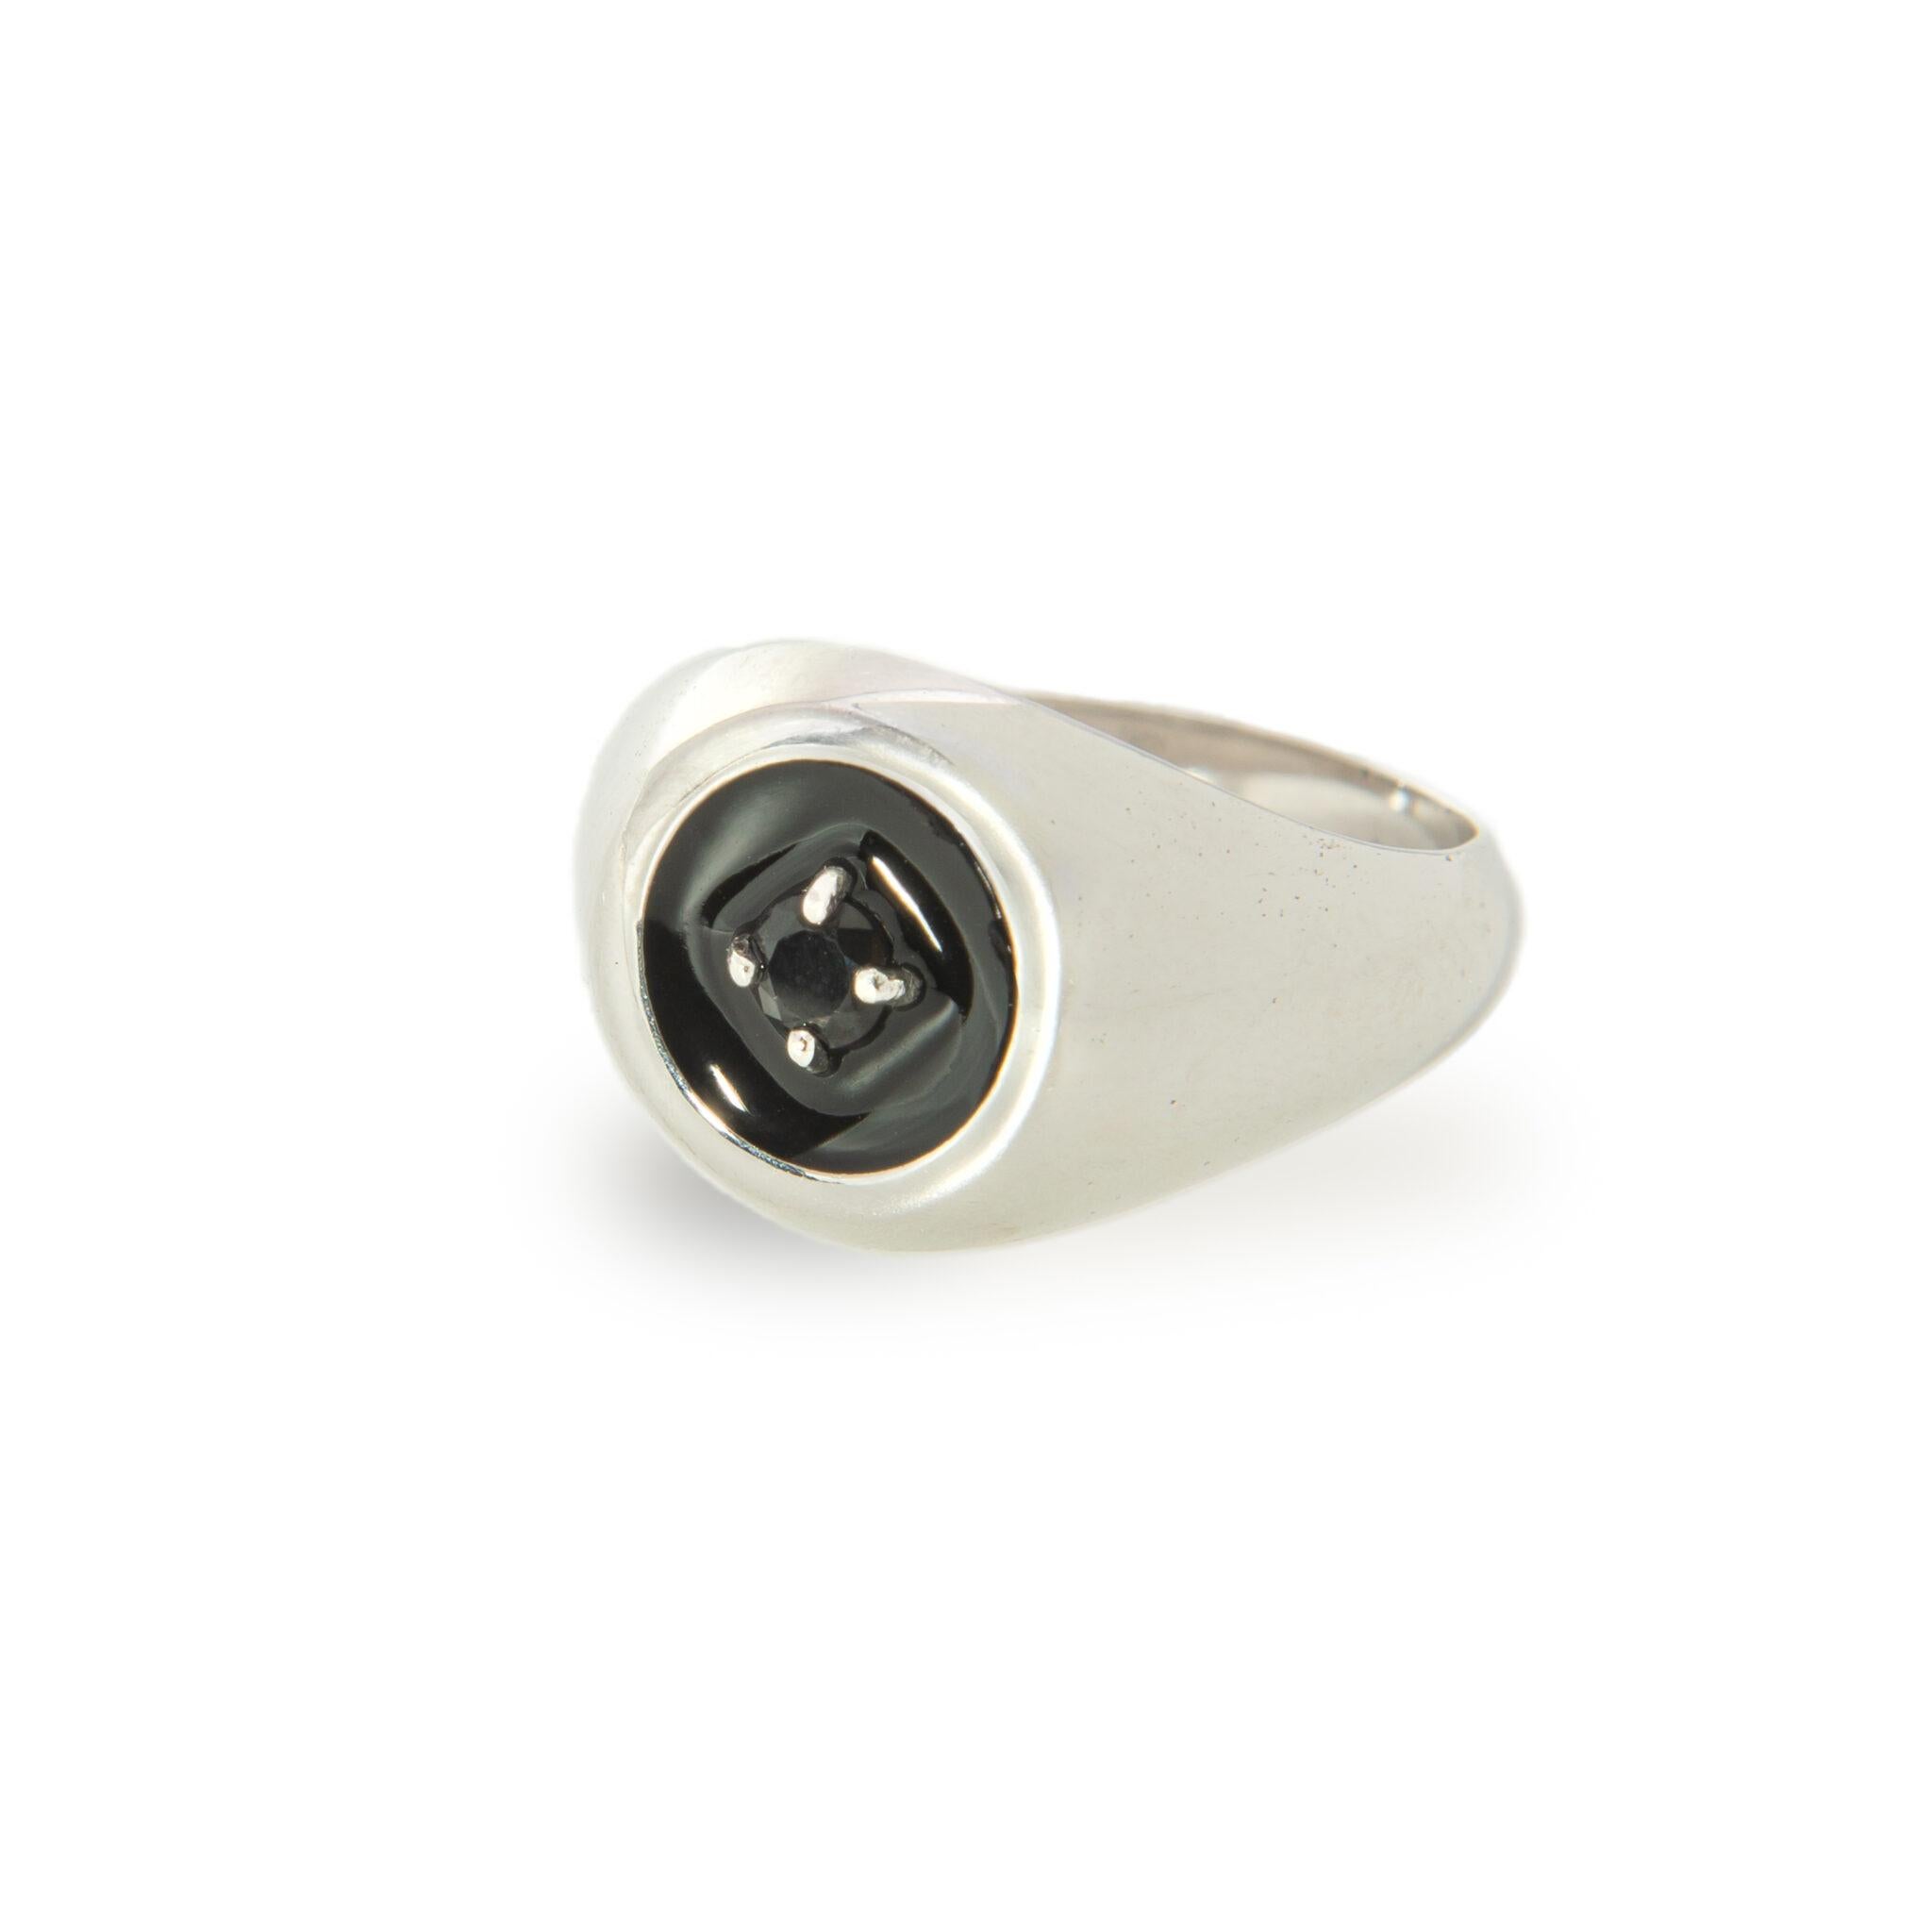 Black enameled mini chevalier ring in 18K gold-plated 925 sterling silver.

The mini chevalier ring is hand-enameled and made entirely in Italy by our master craftsmen.

Including box and Thais Bernardes warranty. Made n Italy